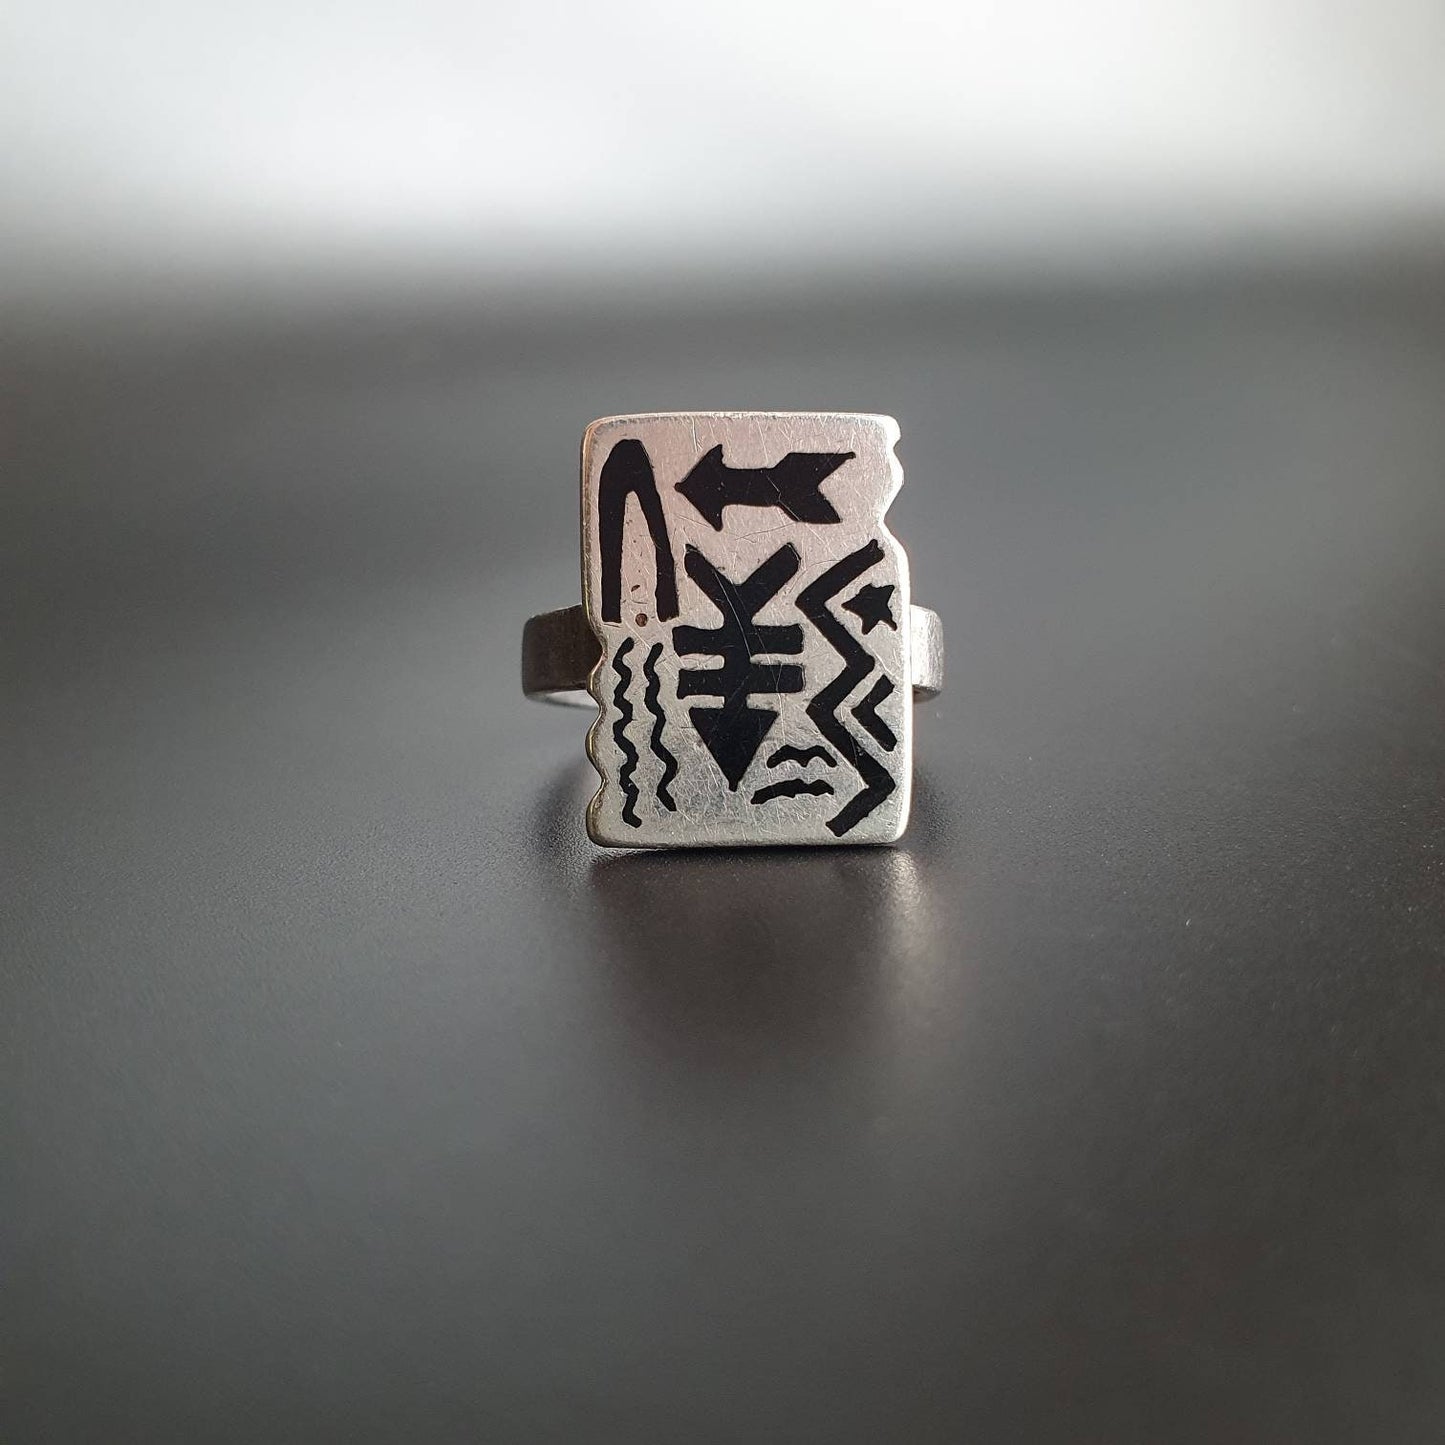 Sterling silver ring hopi design arrow heads native American Indian ring black enamel inlay hopi tribal ring gift collectible